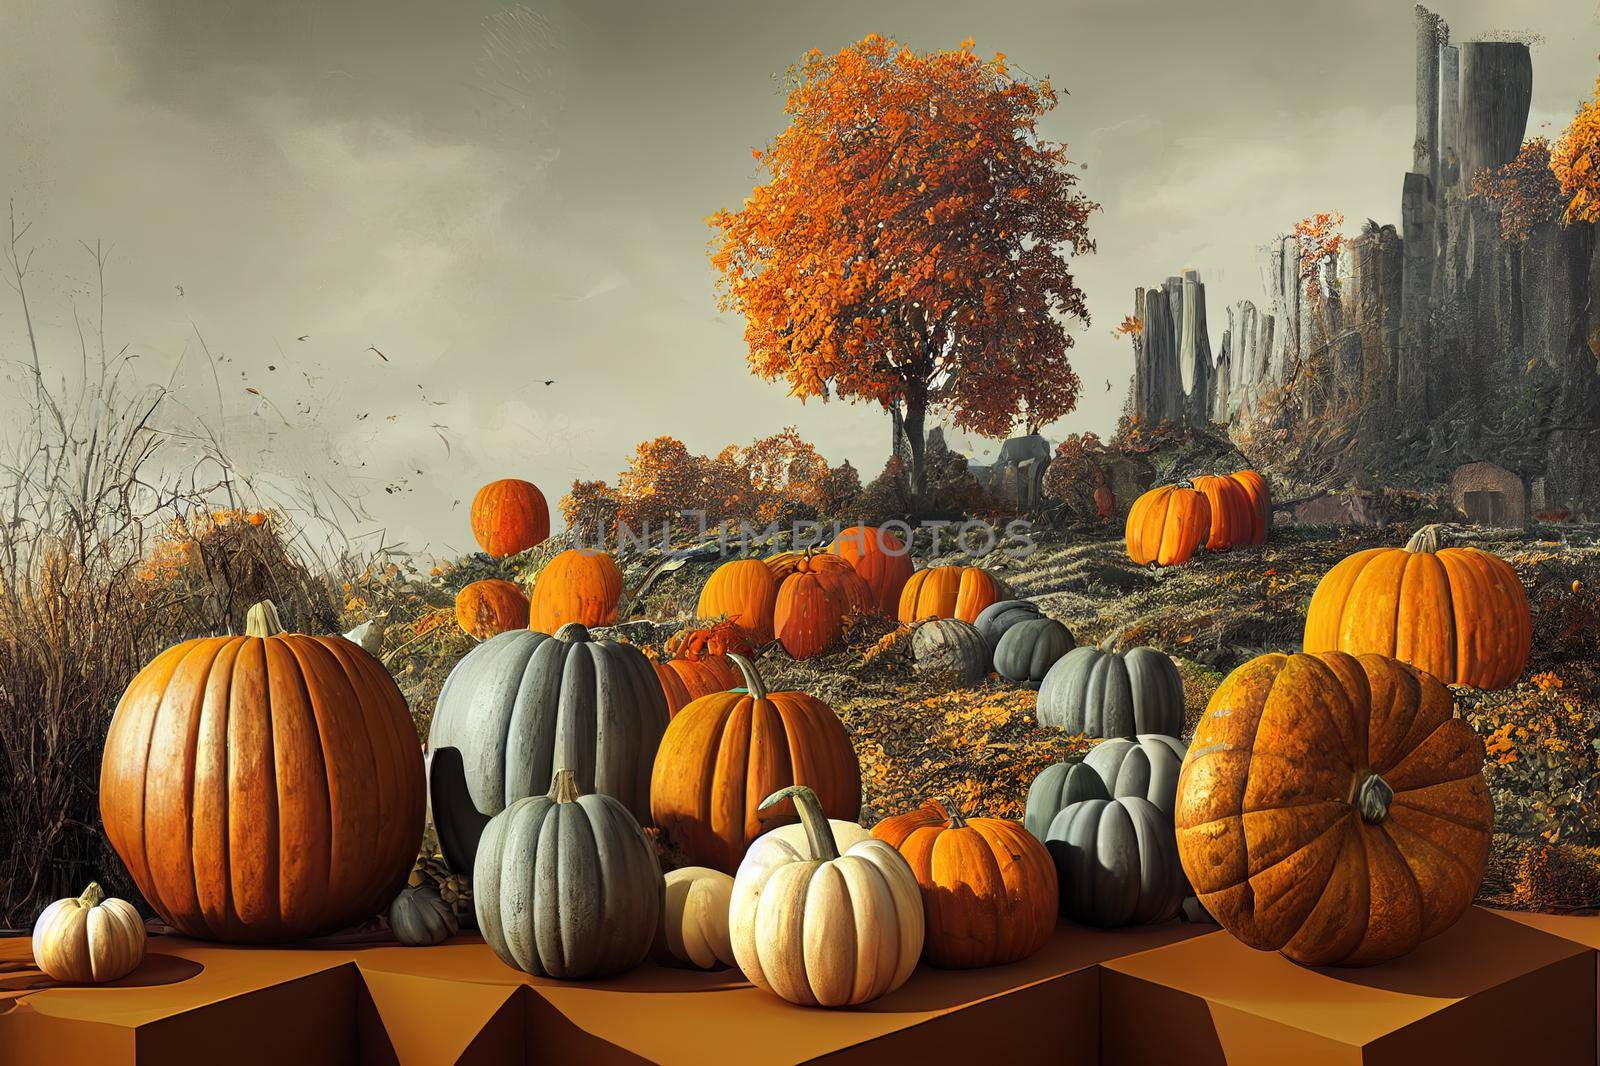 Abstract autumn landscape scene with Product stand and pumpkins. 3d rendering background.. High quality illustration